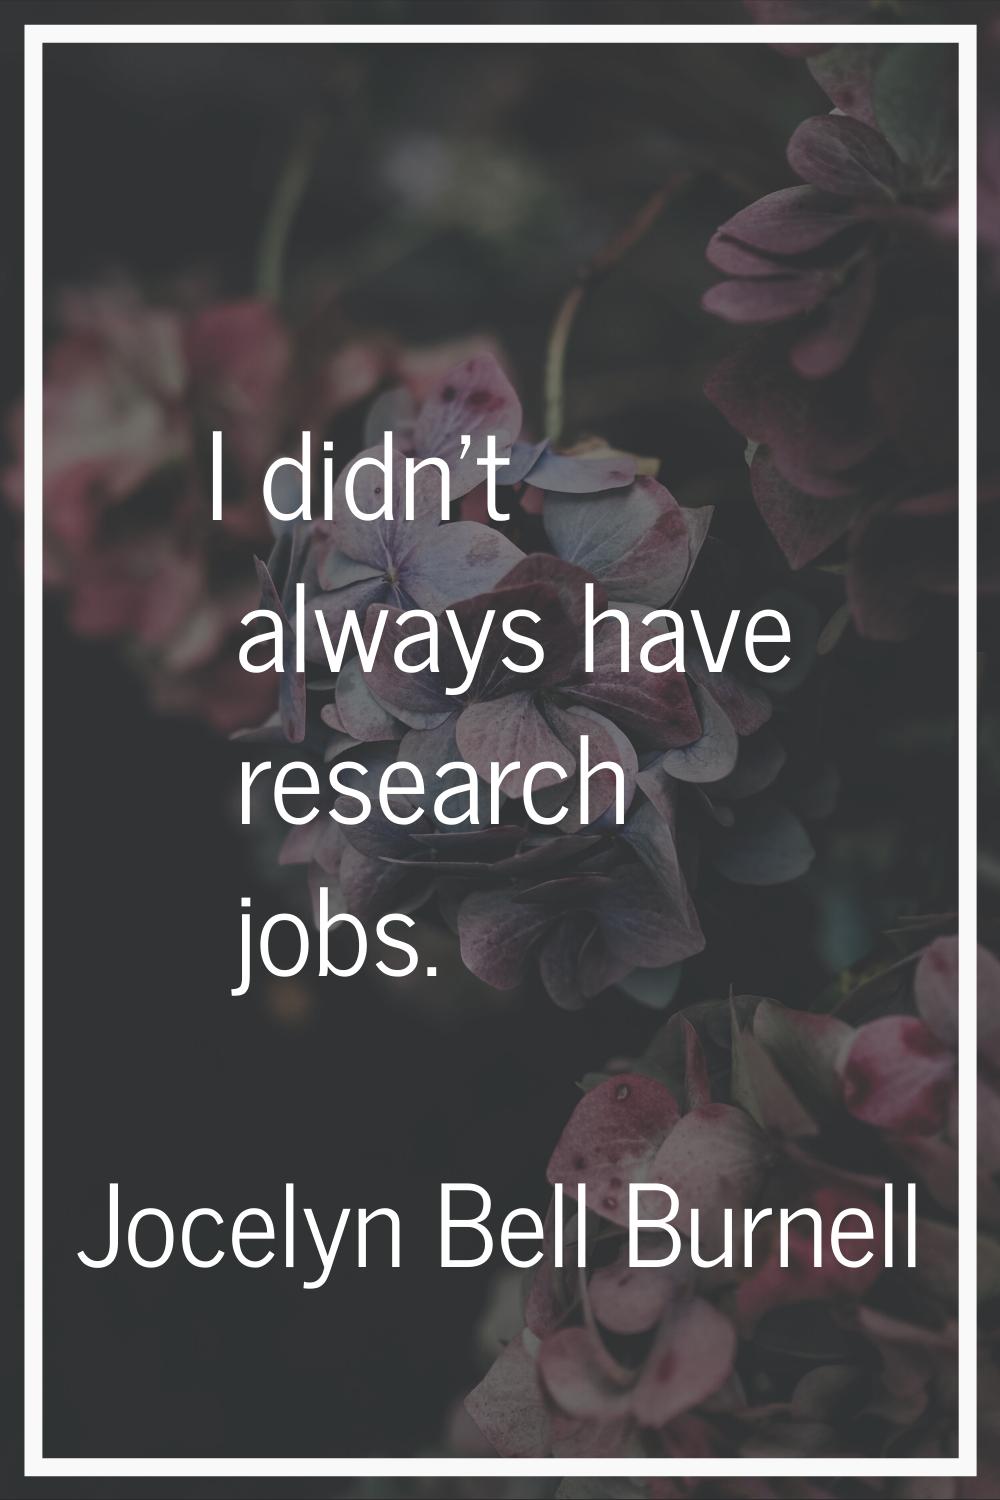 I didn't always have research jobs.